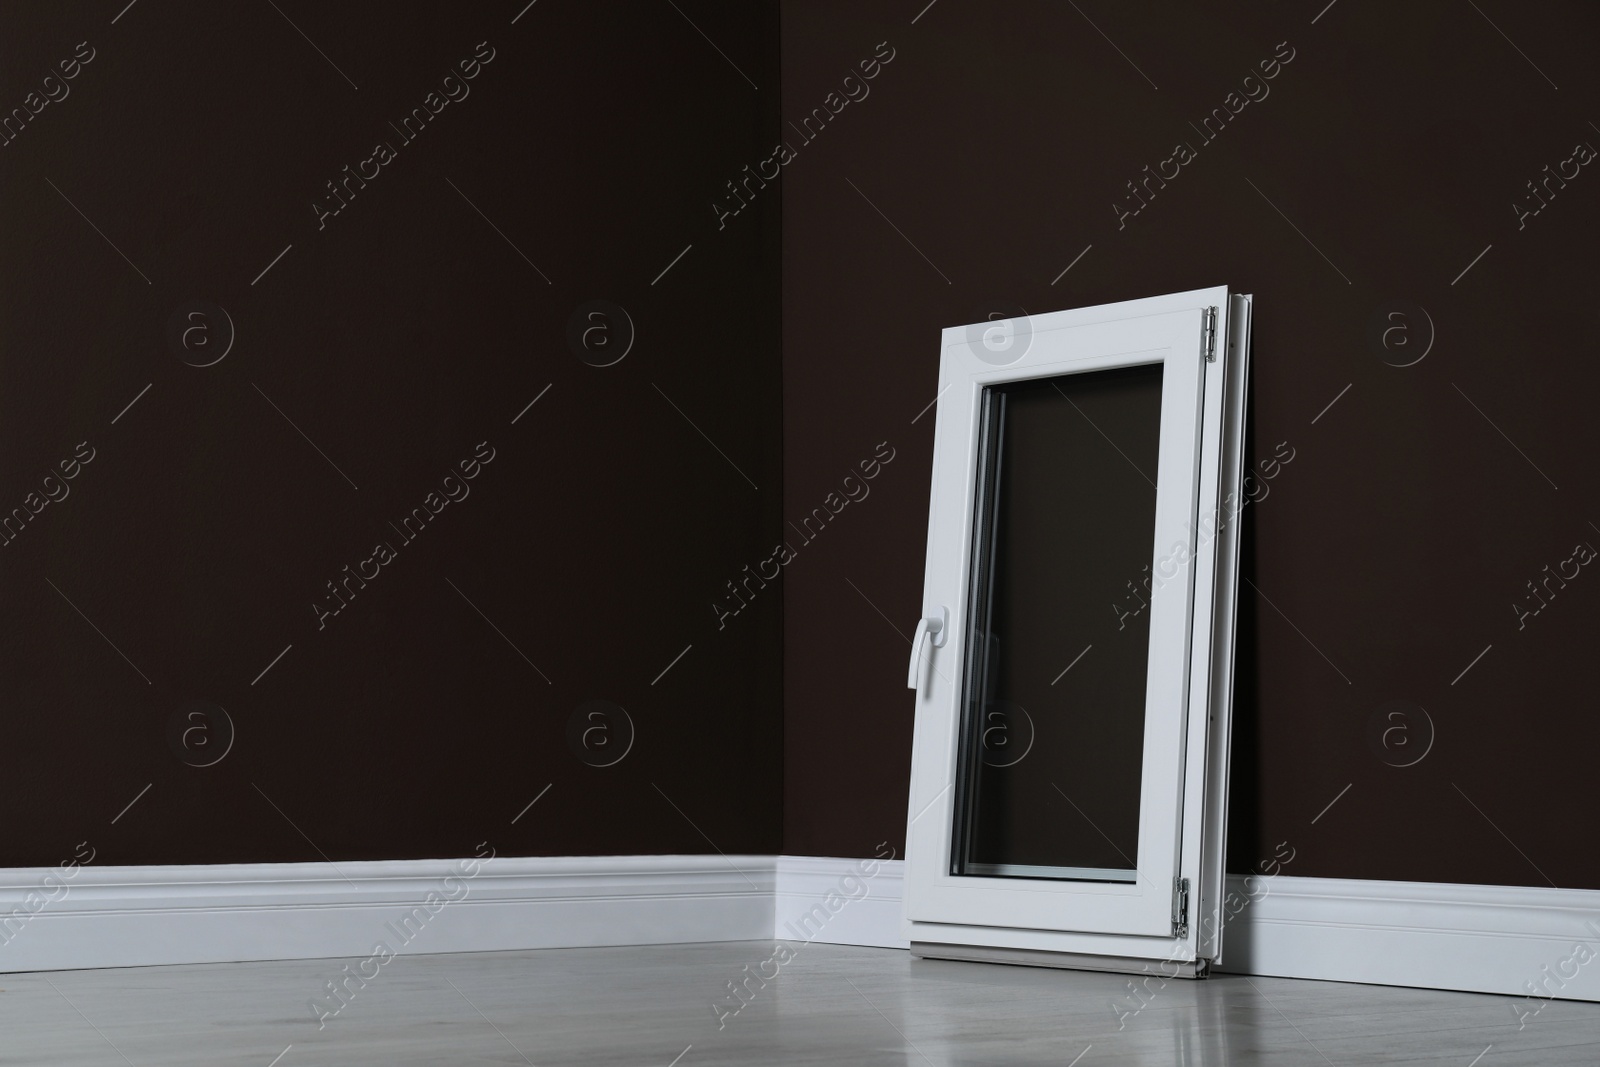 Photo of Modern single casement window near dark brown wall indoors, space for text